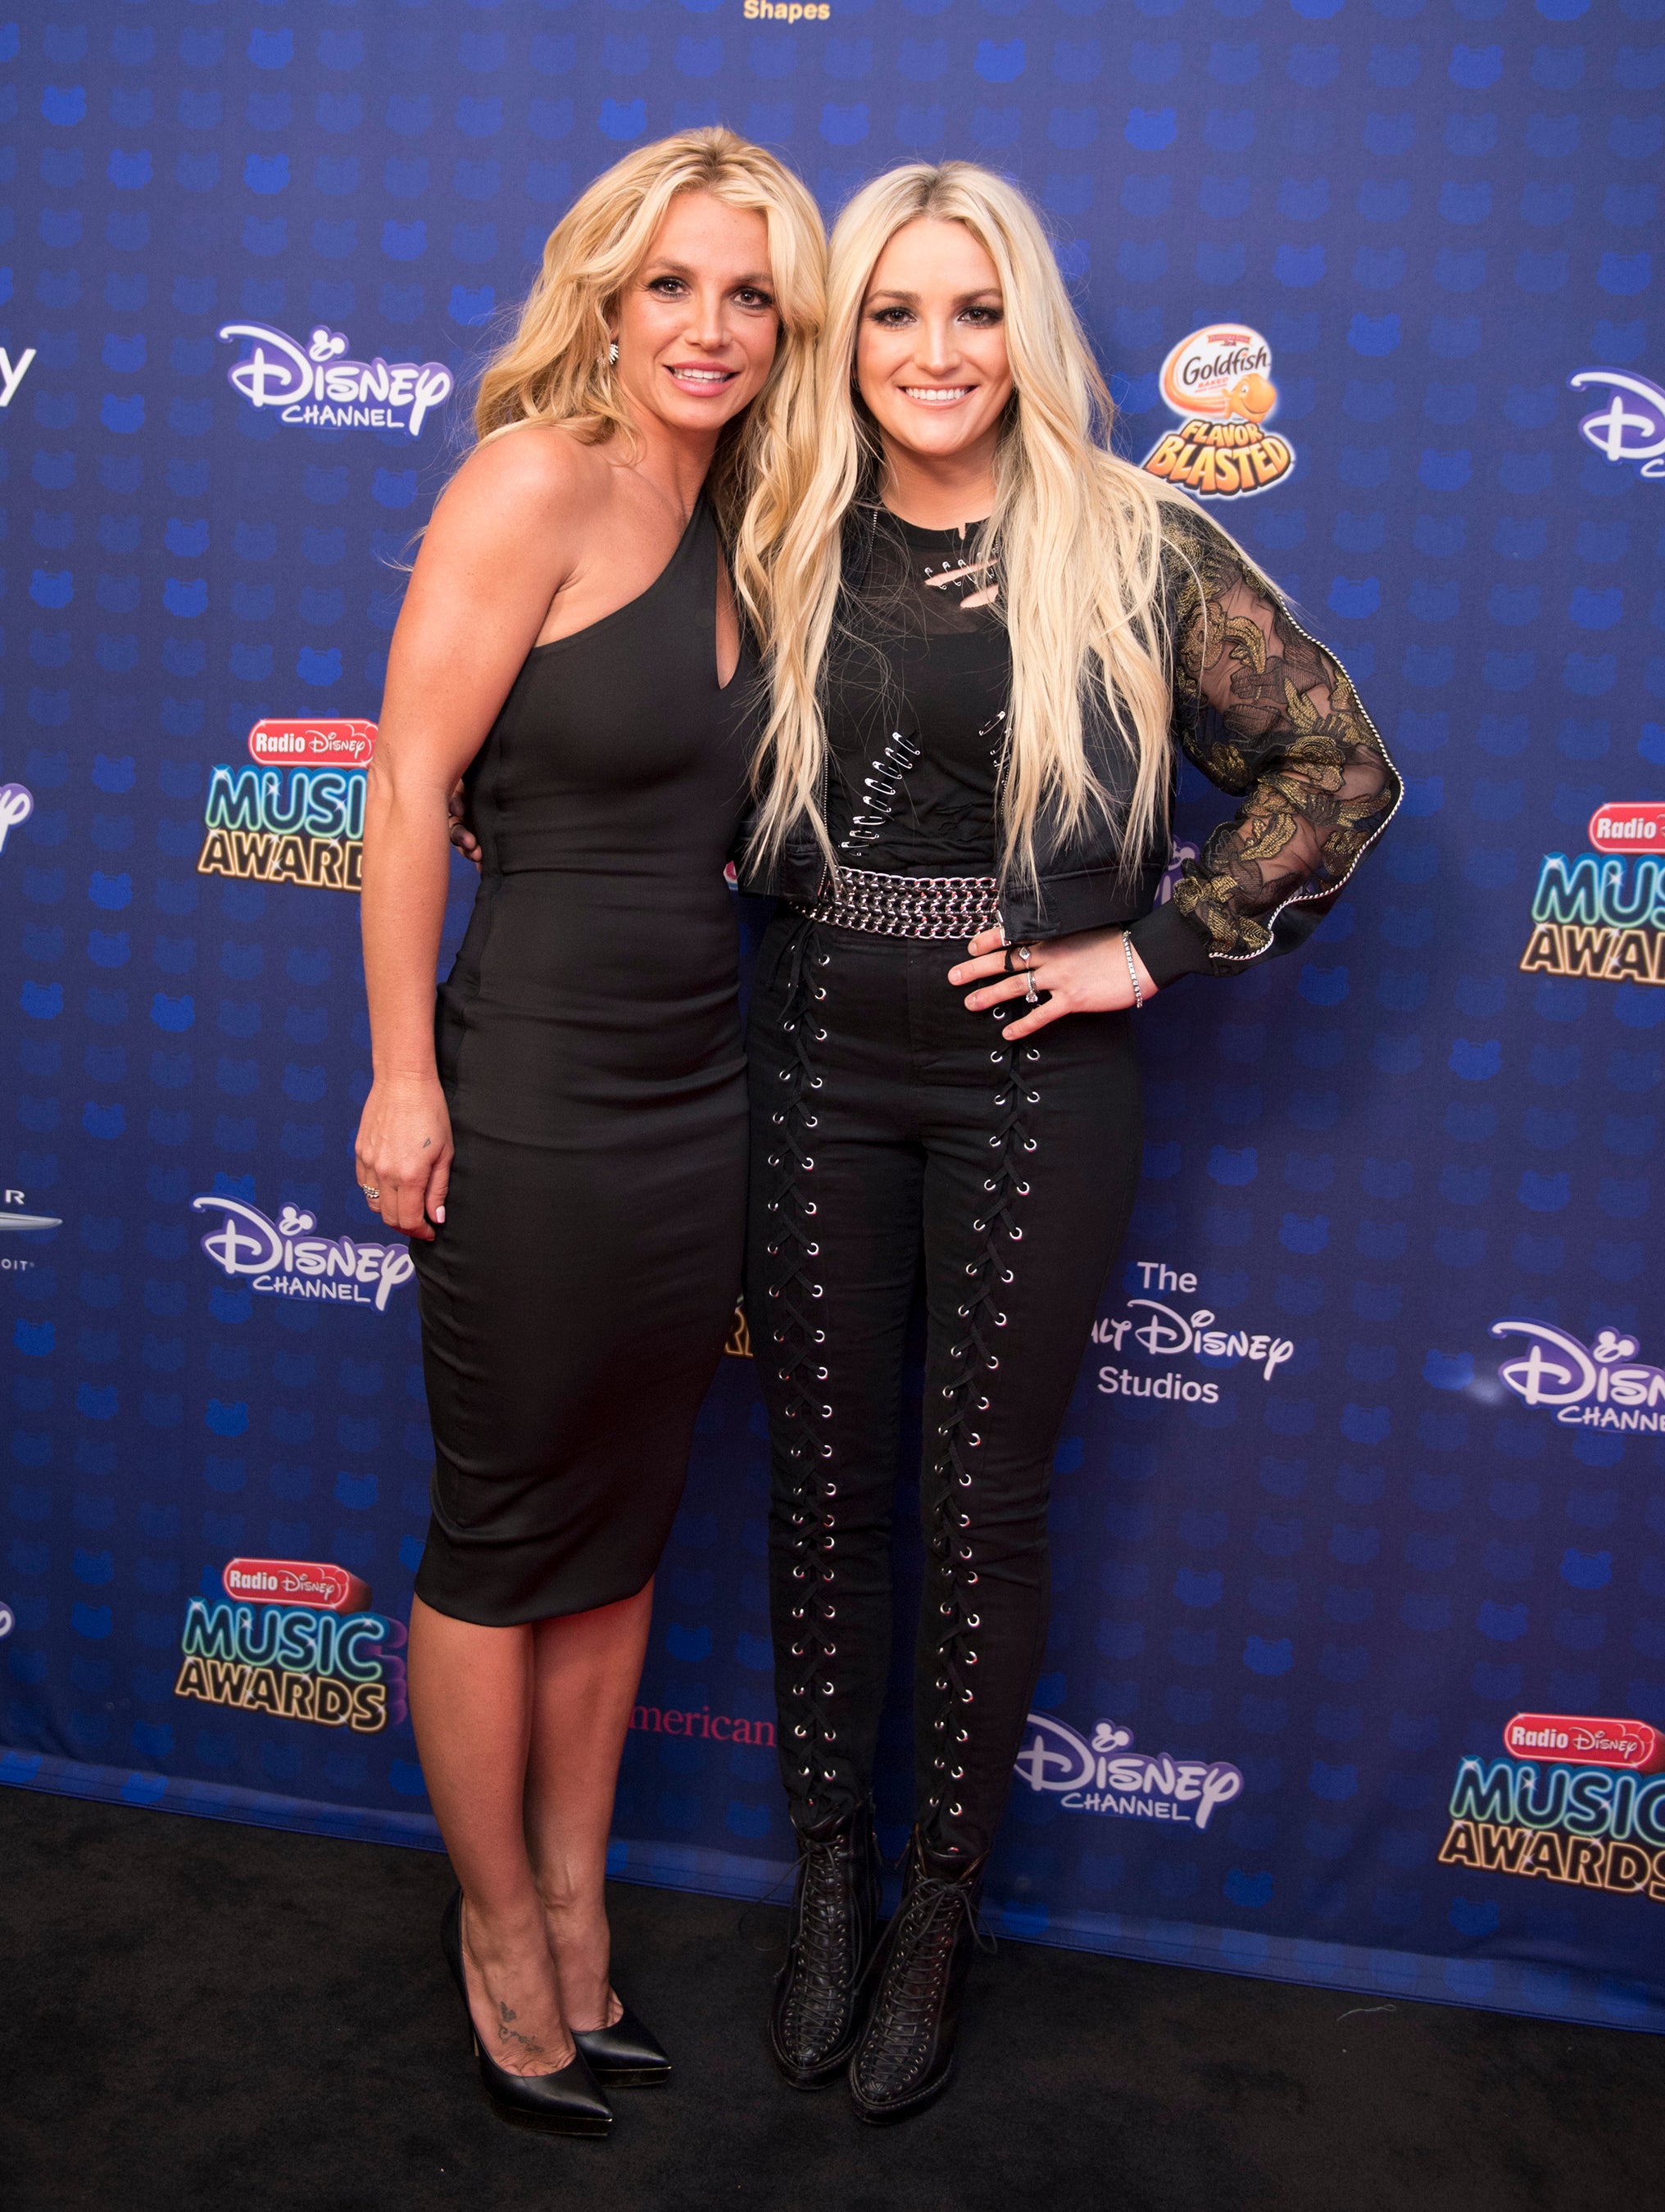 Close-up of Jamie Lynn and Britney at a media event